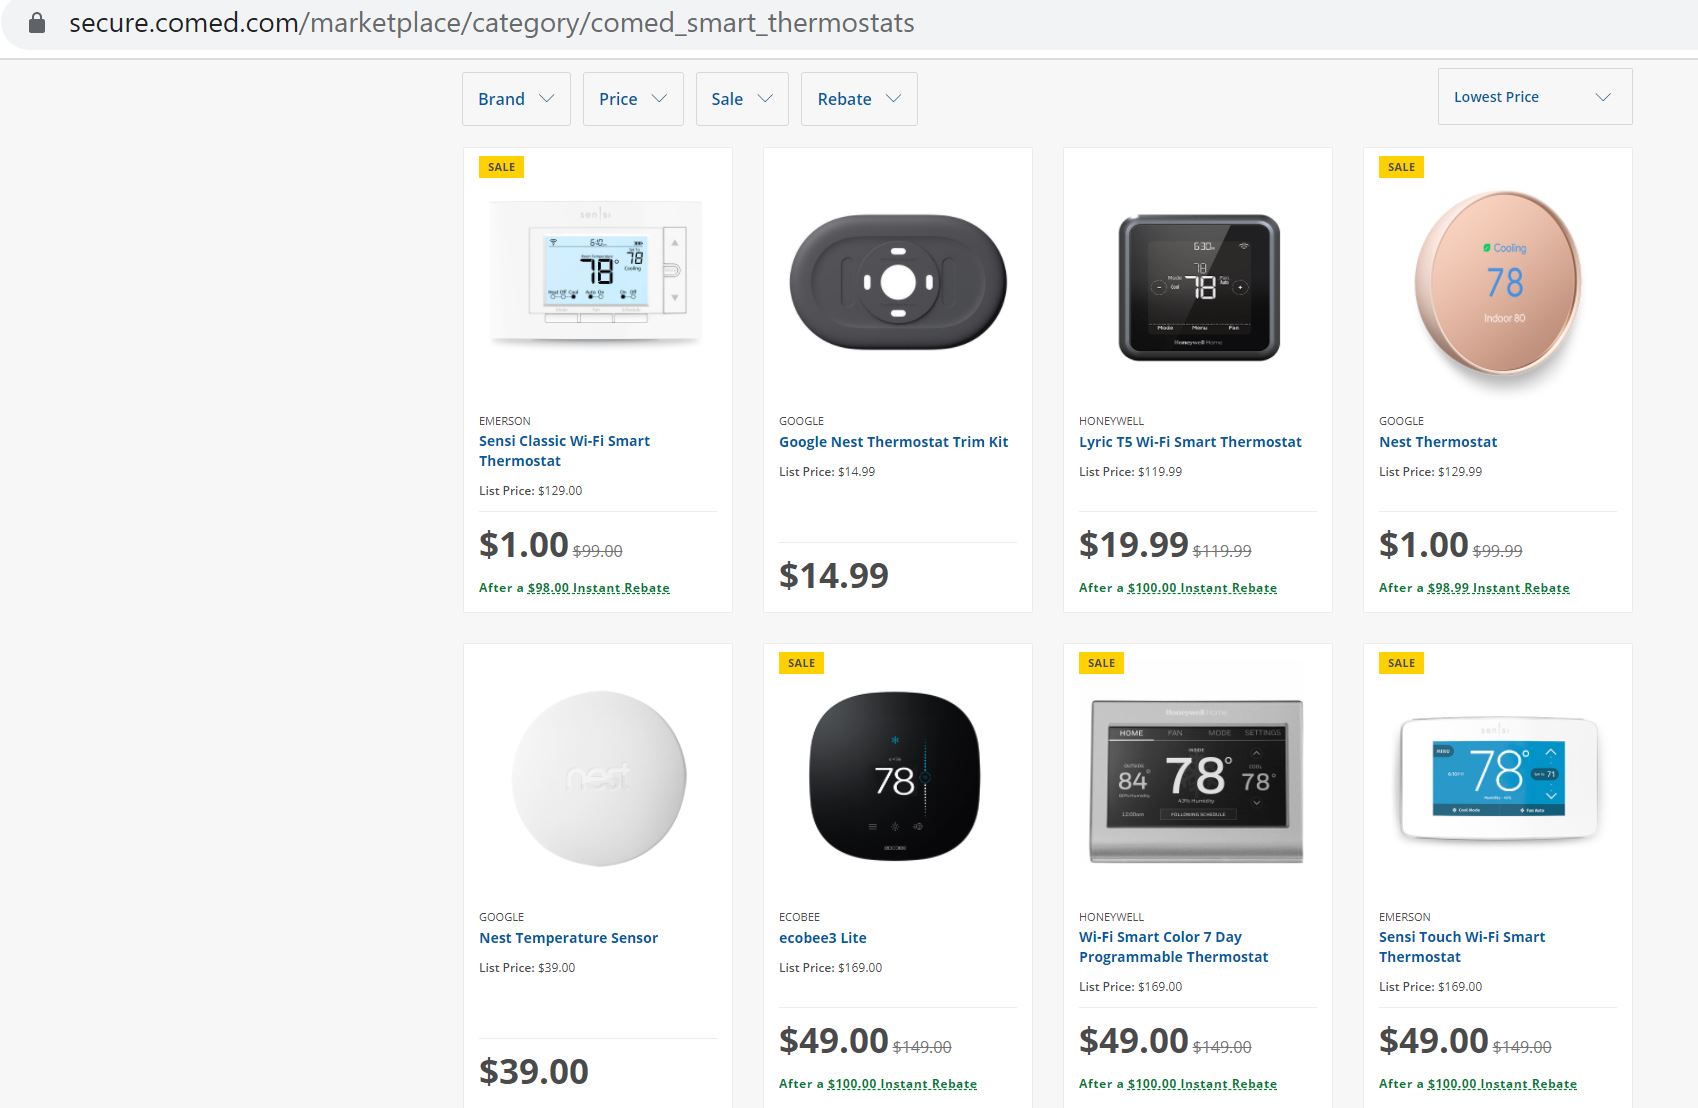 (Chicago only) Google, ecobee, Honeywell, and Emerson smart thermostats for $1-$49 plus taxes, shipping and handling